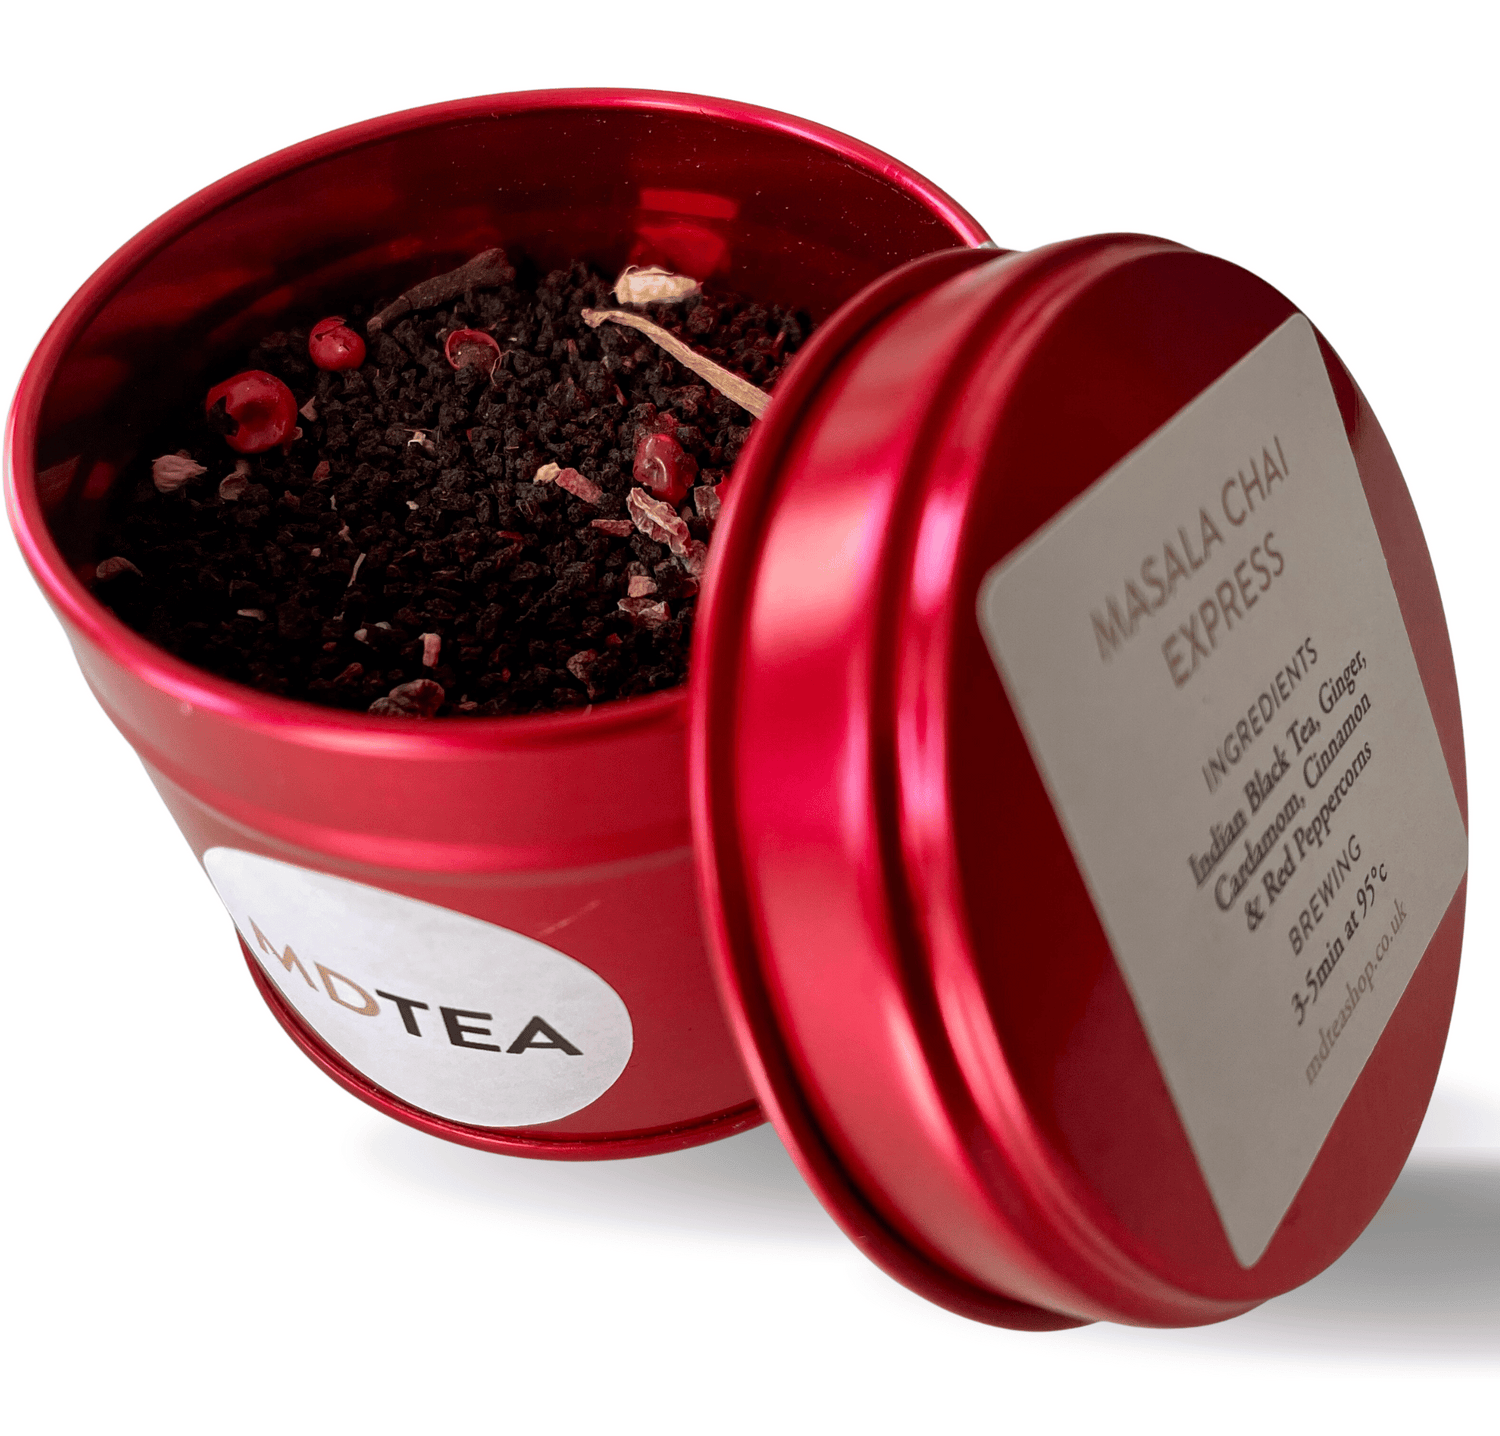 Masala Chai Express – sweet and spicy black tea with red peppercorns | MDTEA